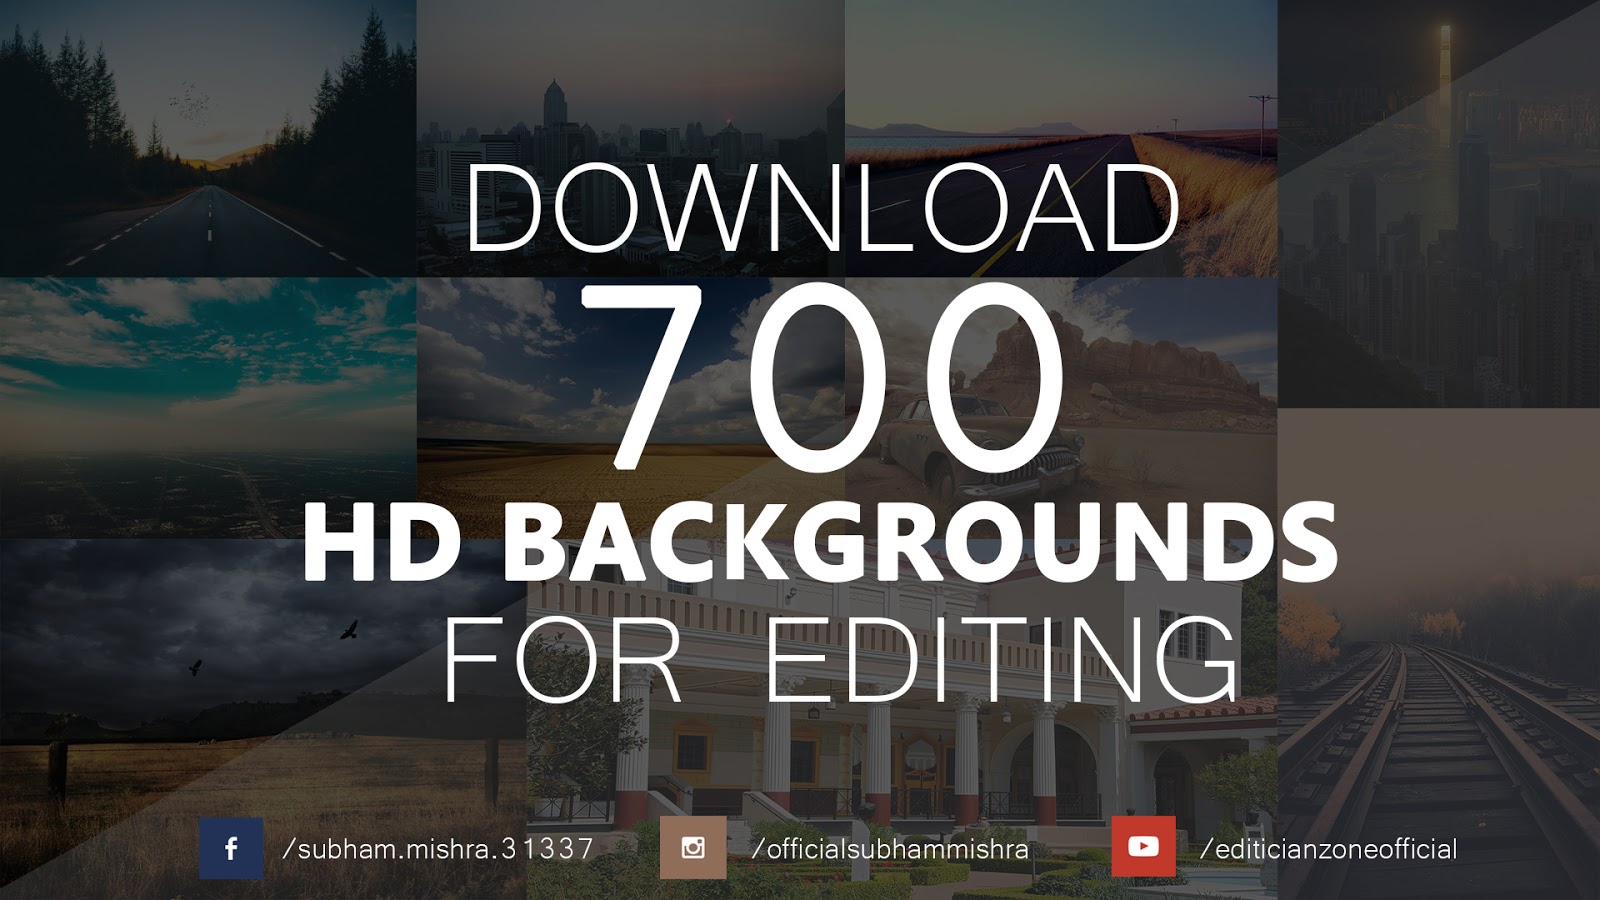 Download 700 HD Backgrounds For Editings Editician Zone